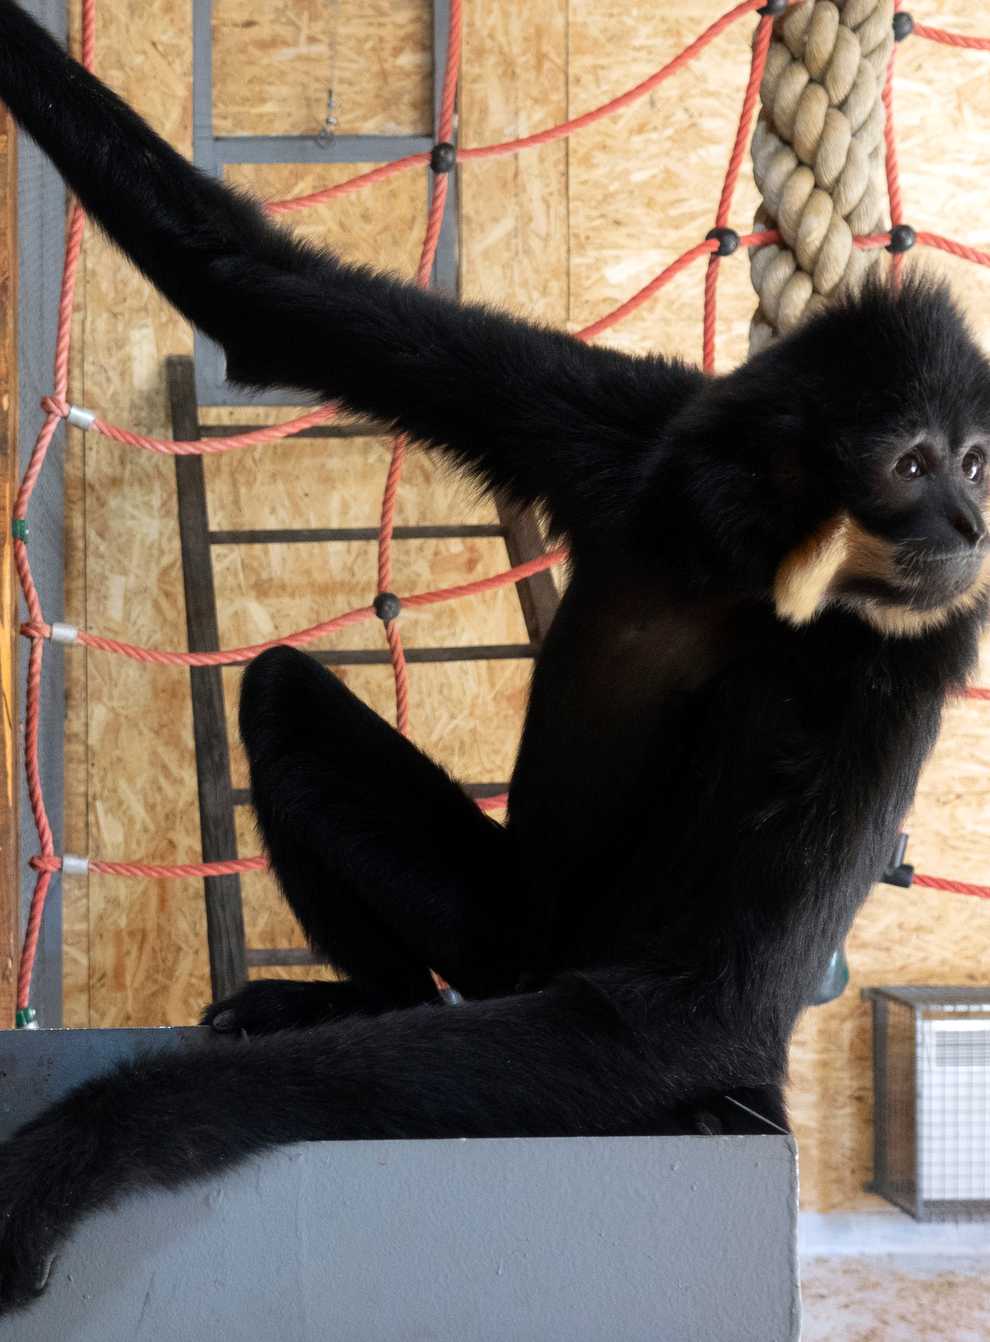 A gibbon in the enclosure at the zoo in Sarajevo